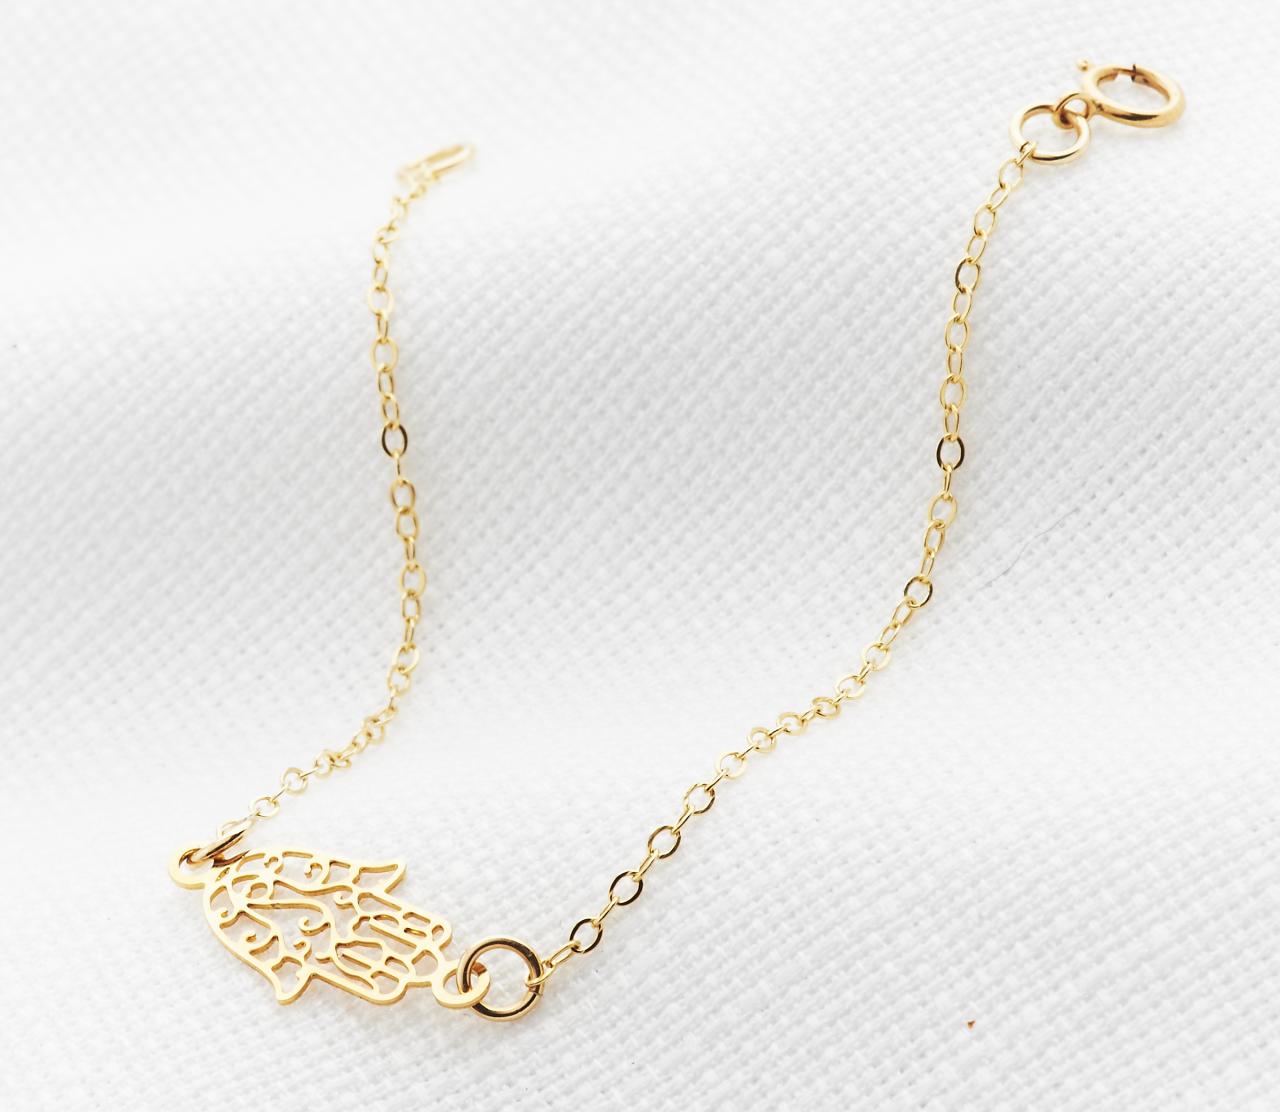 Hamsa Bracelet, Gold Bracelet, Gold Hand Bracelet, Gold Hamsa, Hamsa Jewelry, Delicate Bracelet, Luck Jewelry, Anklet , Gold Filled